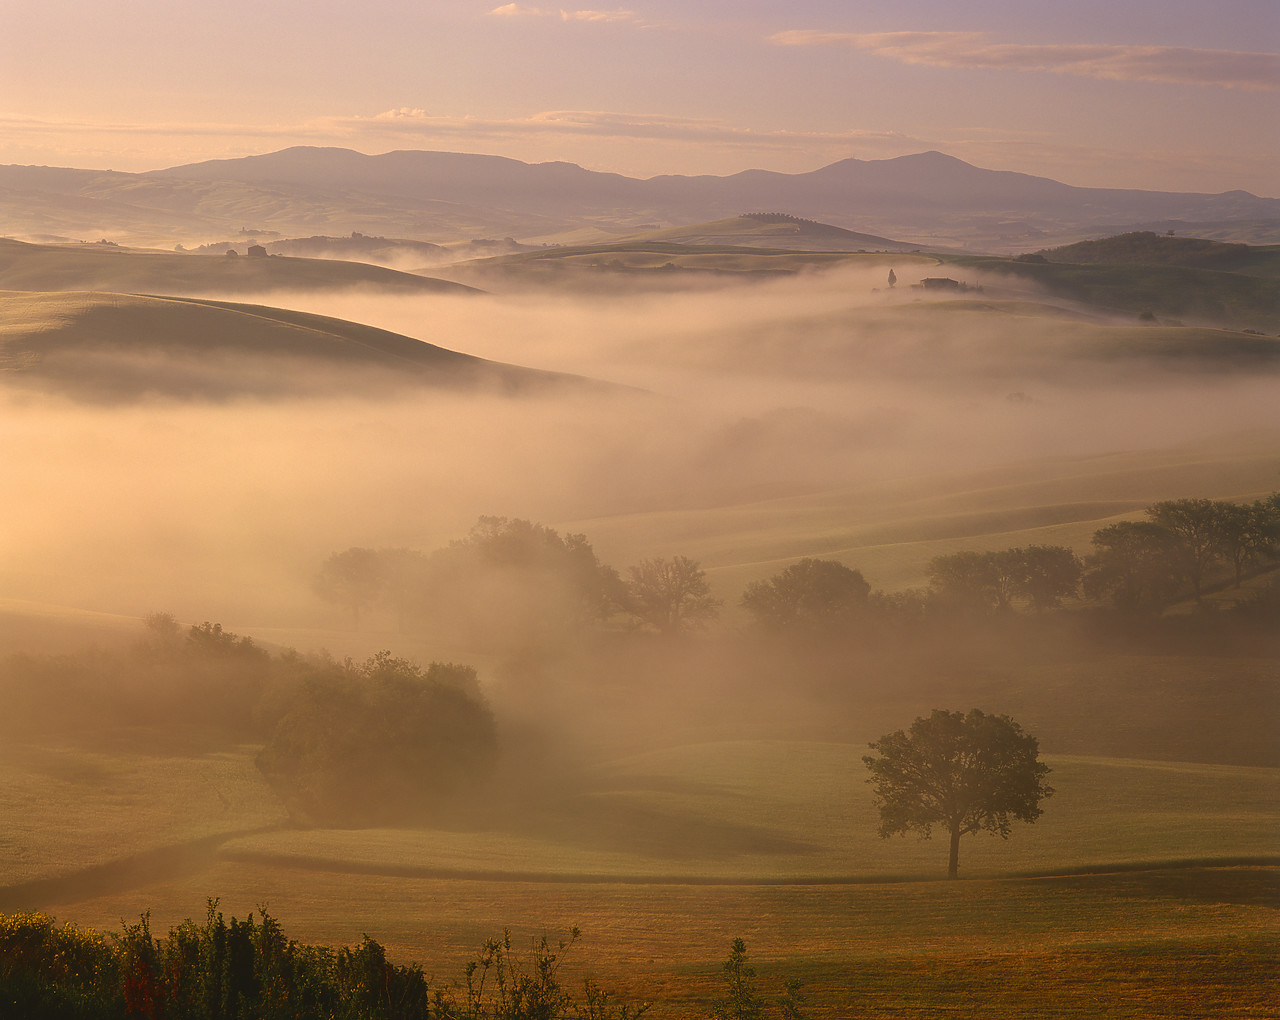 #020145-1 - Valley in Morning Mist, San Quirico, Tuscany, Italy